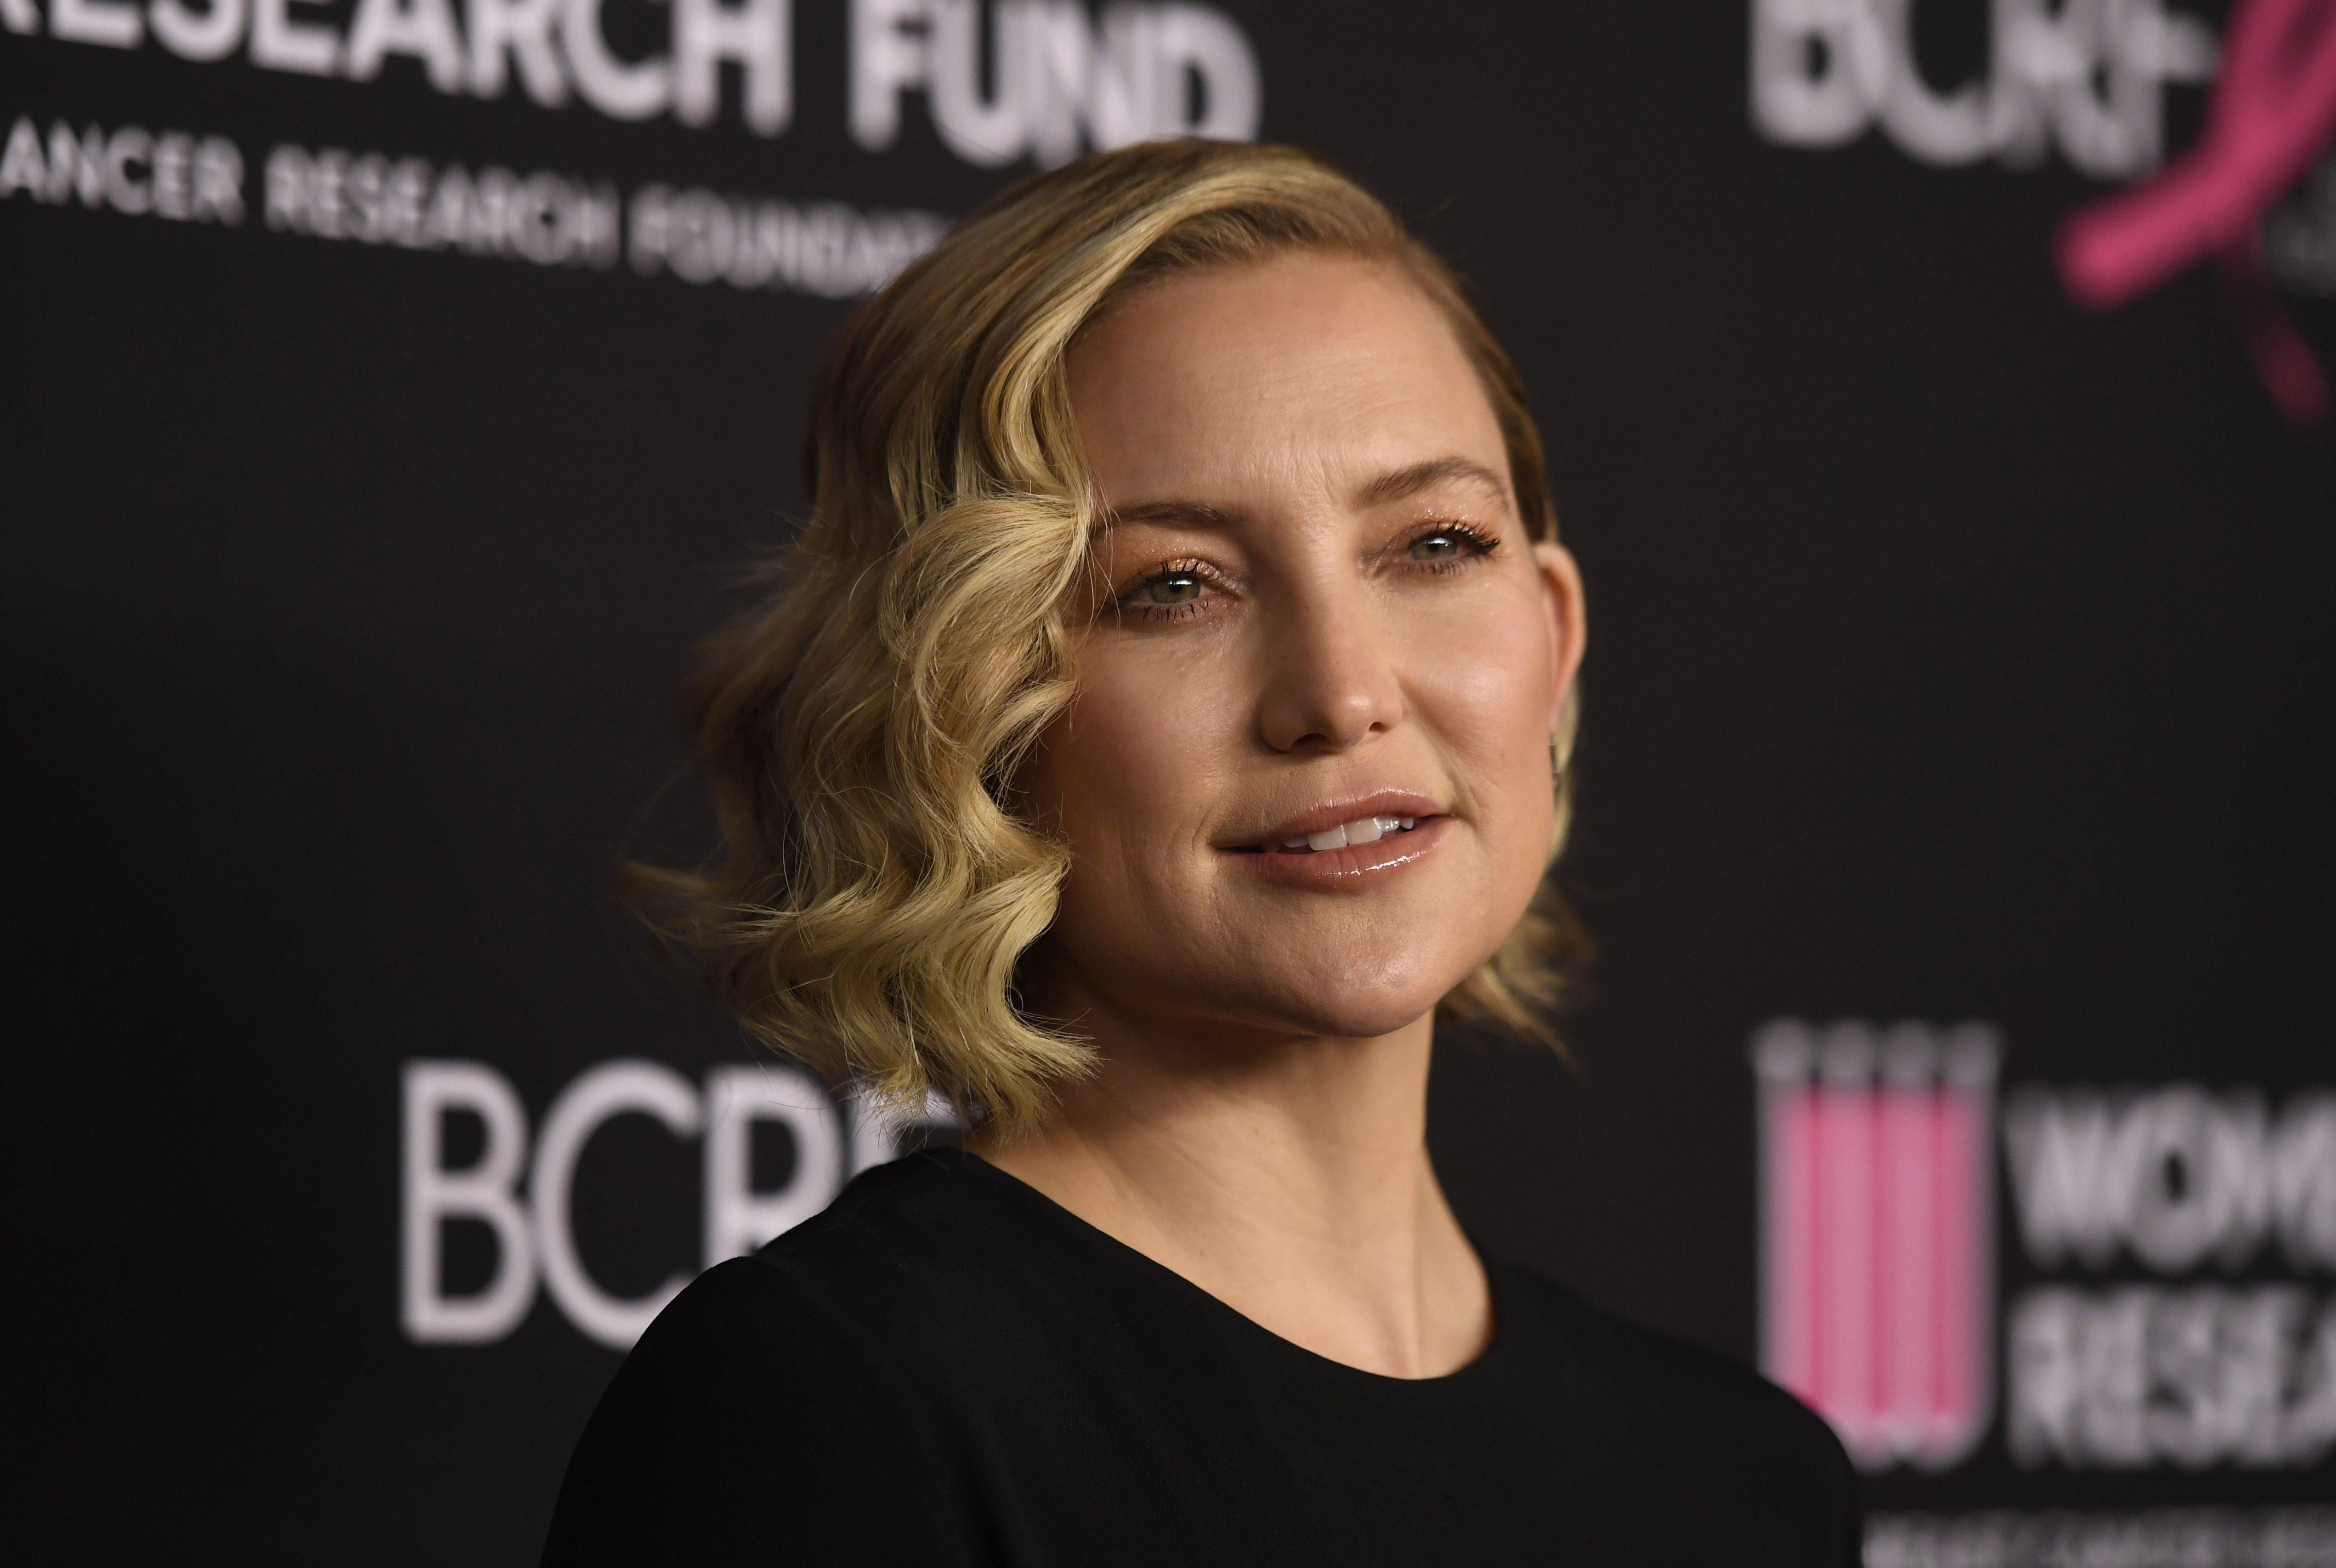 Kate Hudson attends The Women's Cancer Research Fund's An Unforgettable Evening Benefit Gala at the Beverly Wilshire Four Seasons Hotel on February 28, 2019 | Photo: Getty Images